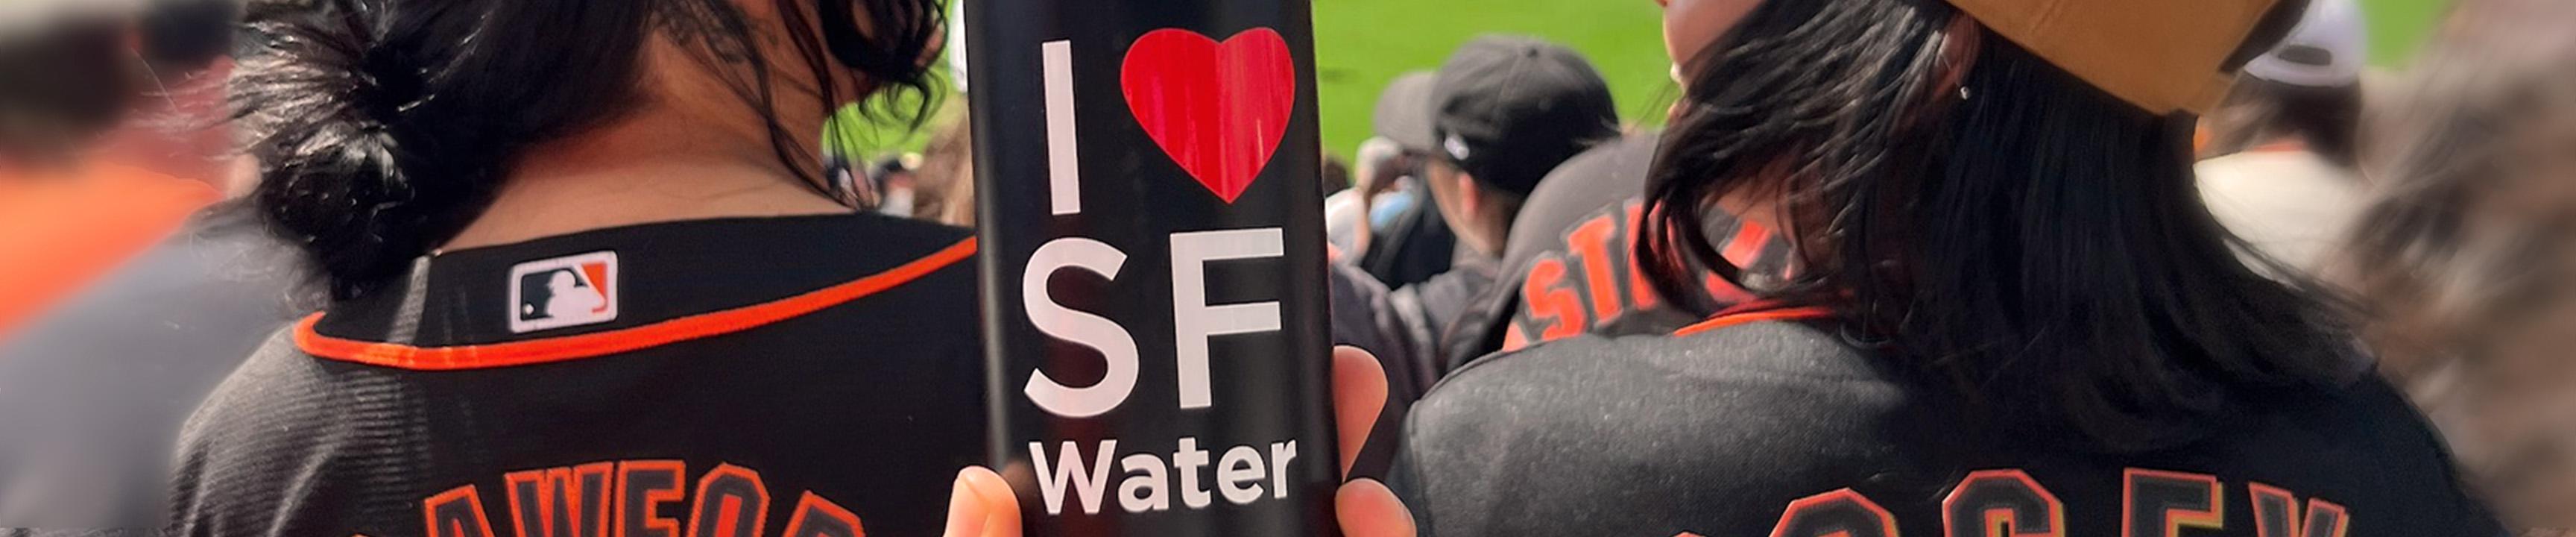 Water bottle featured at SF Giants game